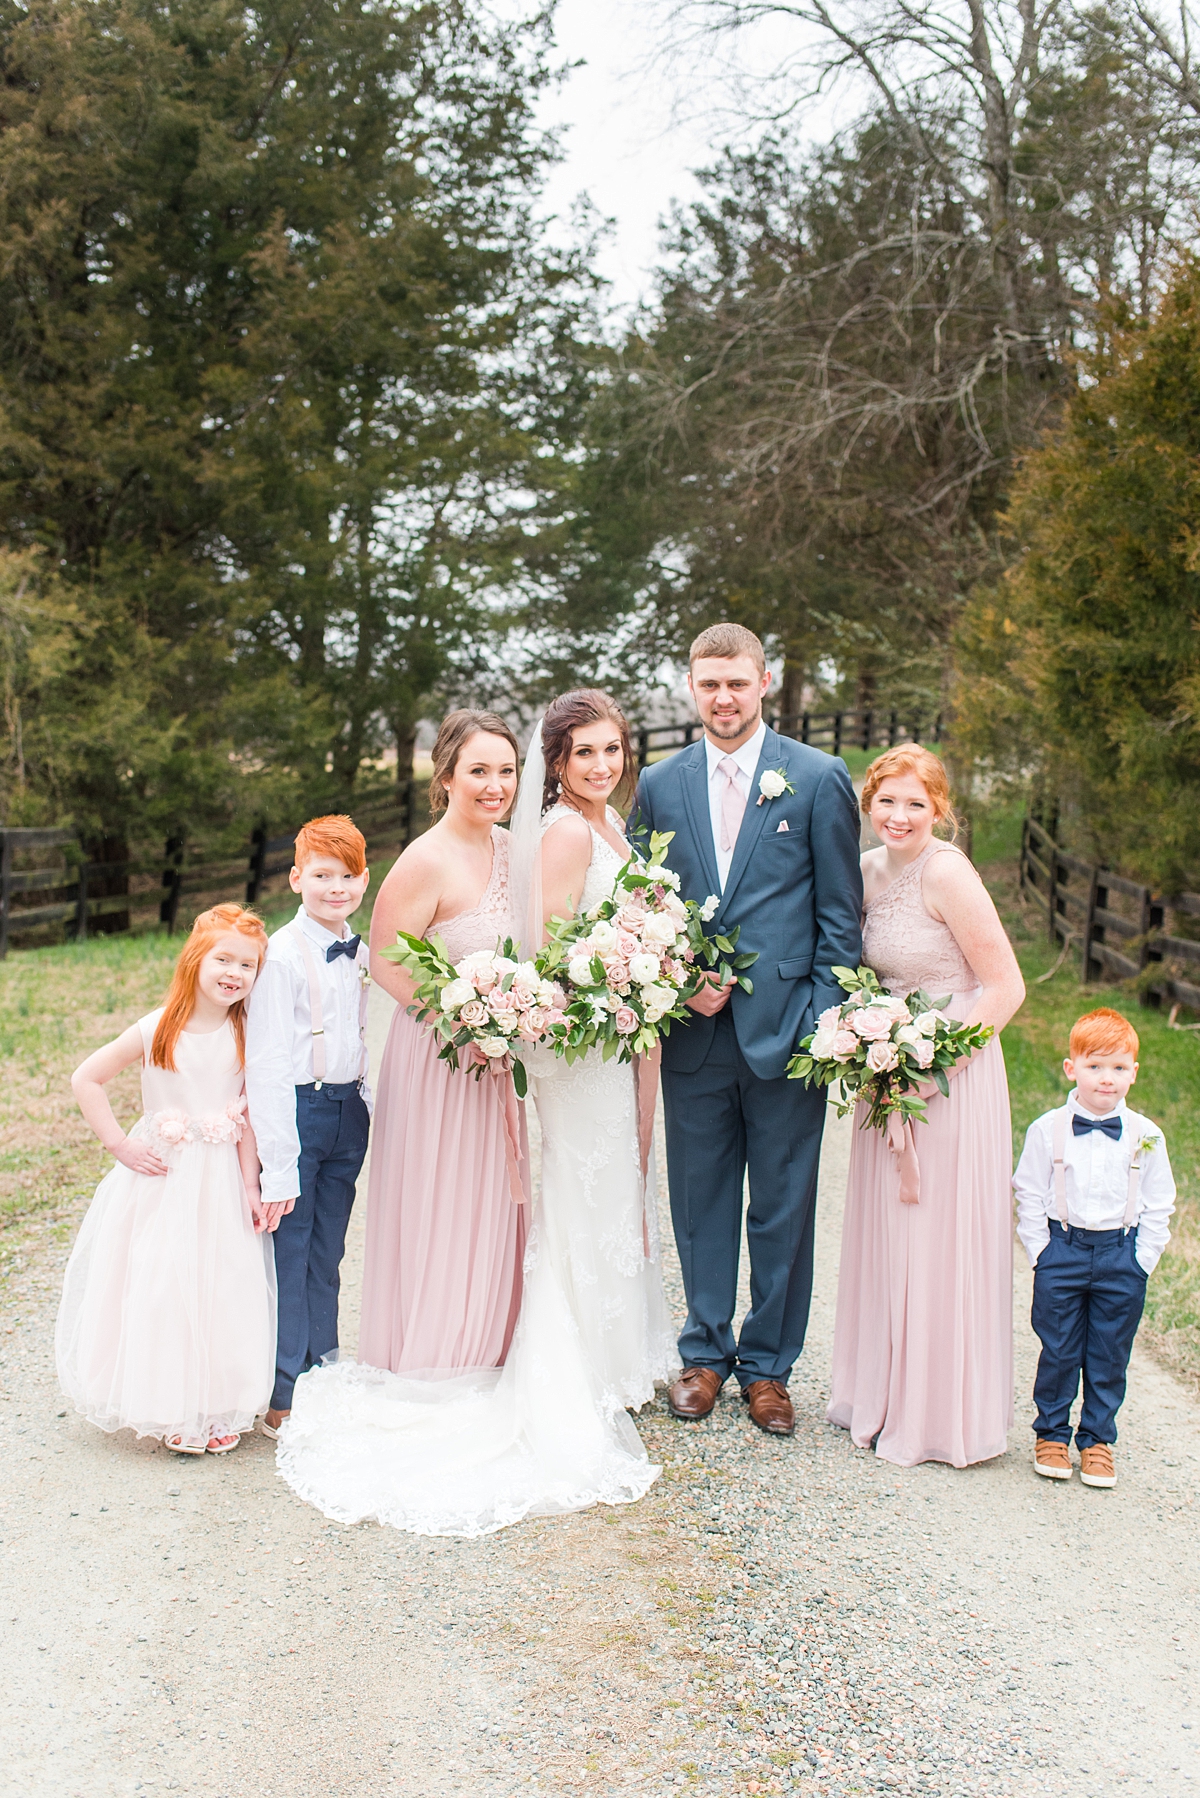 Bridal Party Portraits from Romantic Wedding Styled Shoot at Lakeside at Welch Estate. Wedding Photography by Powhatan Wedding Photographer Kailey Brianne Photography. 